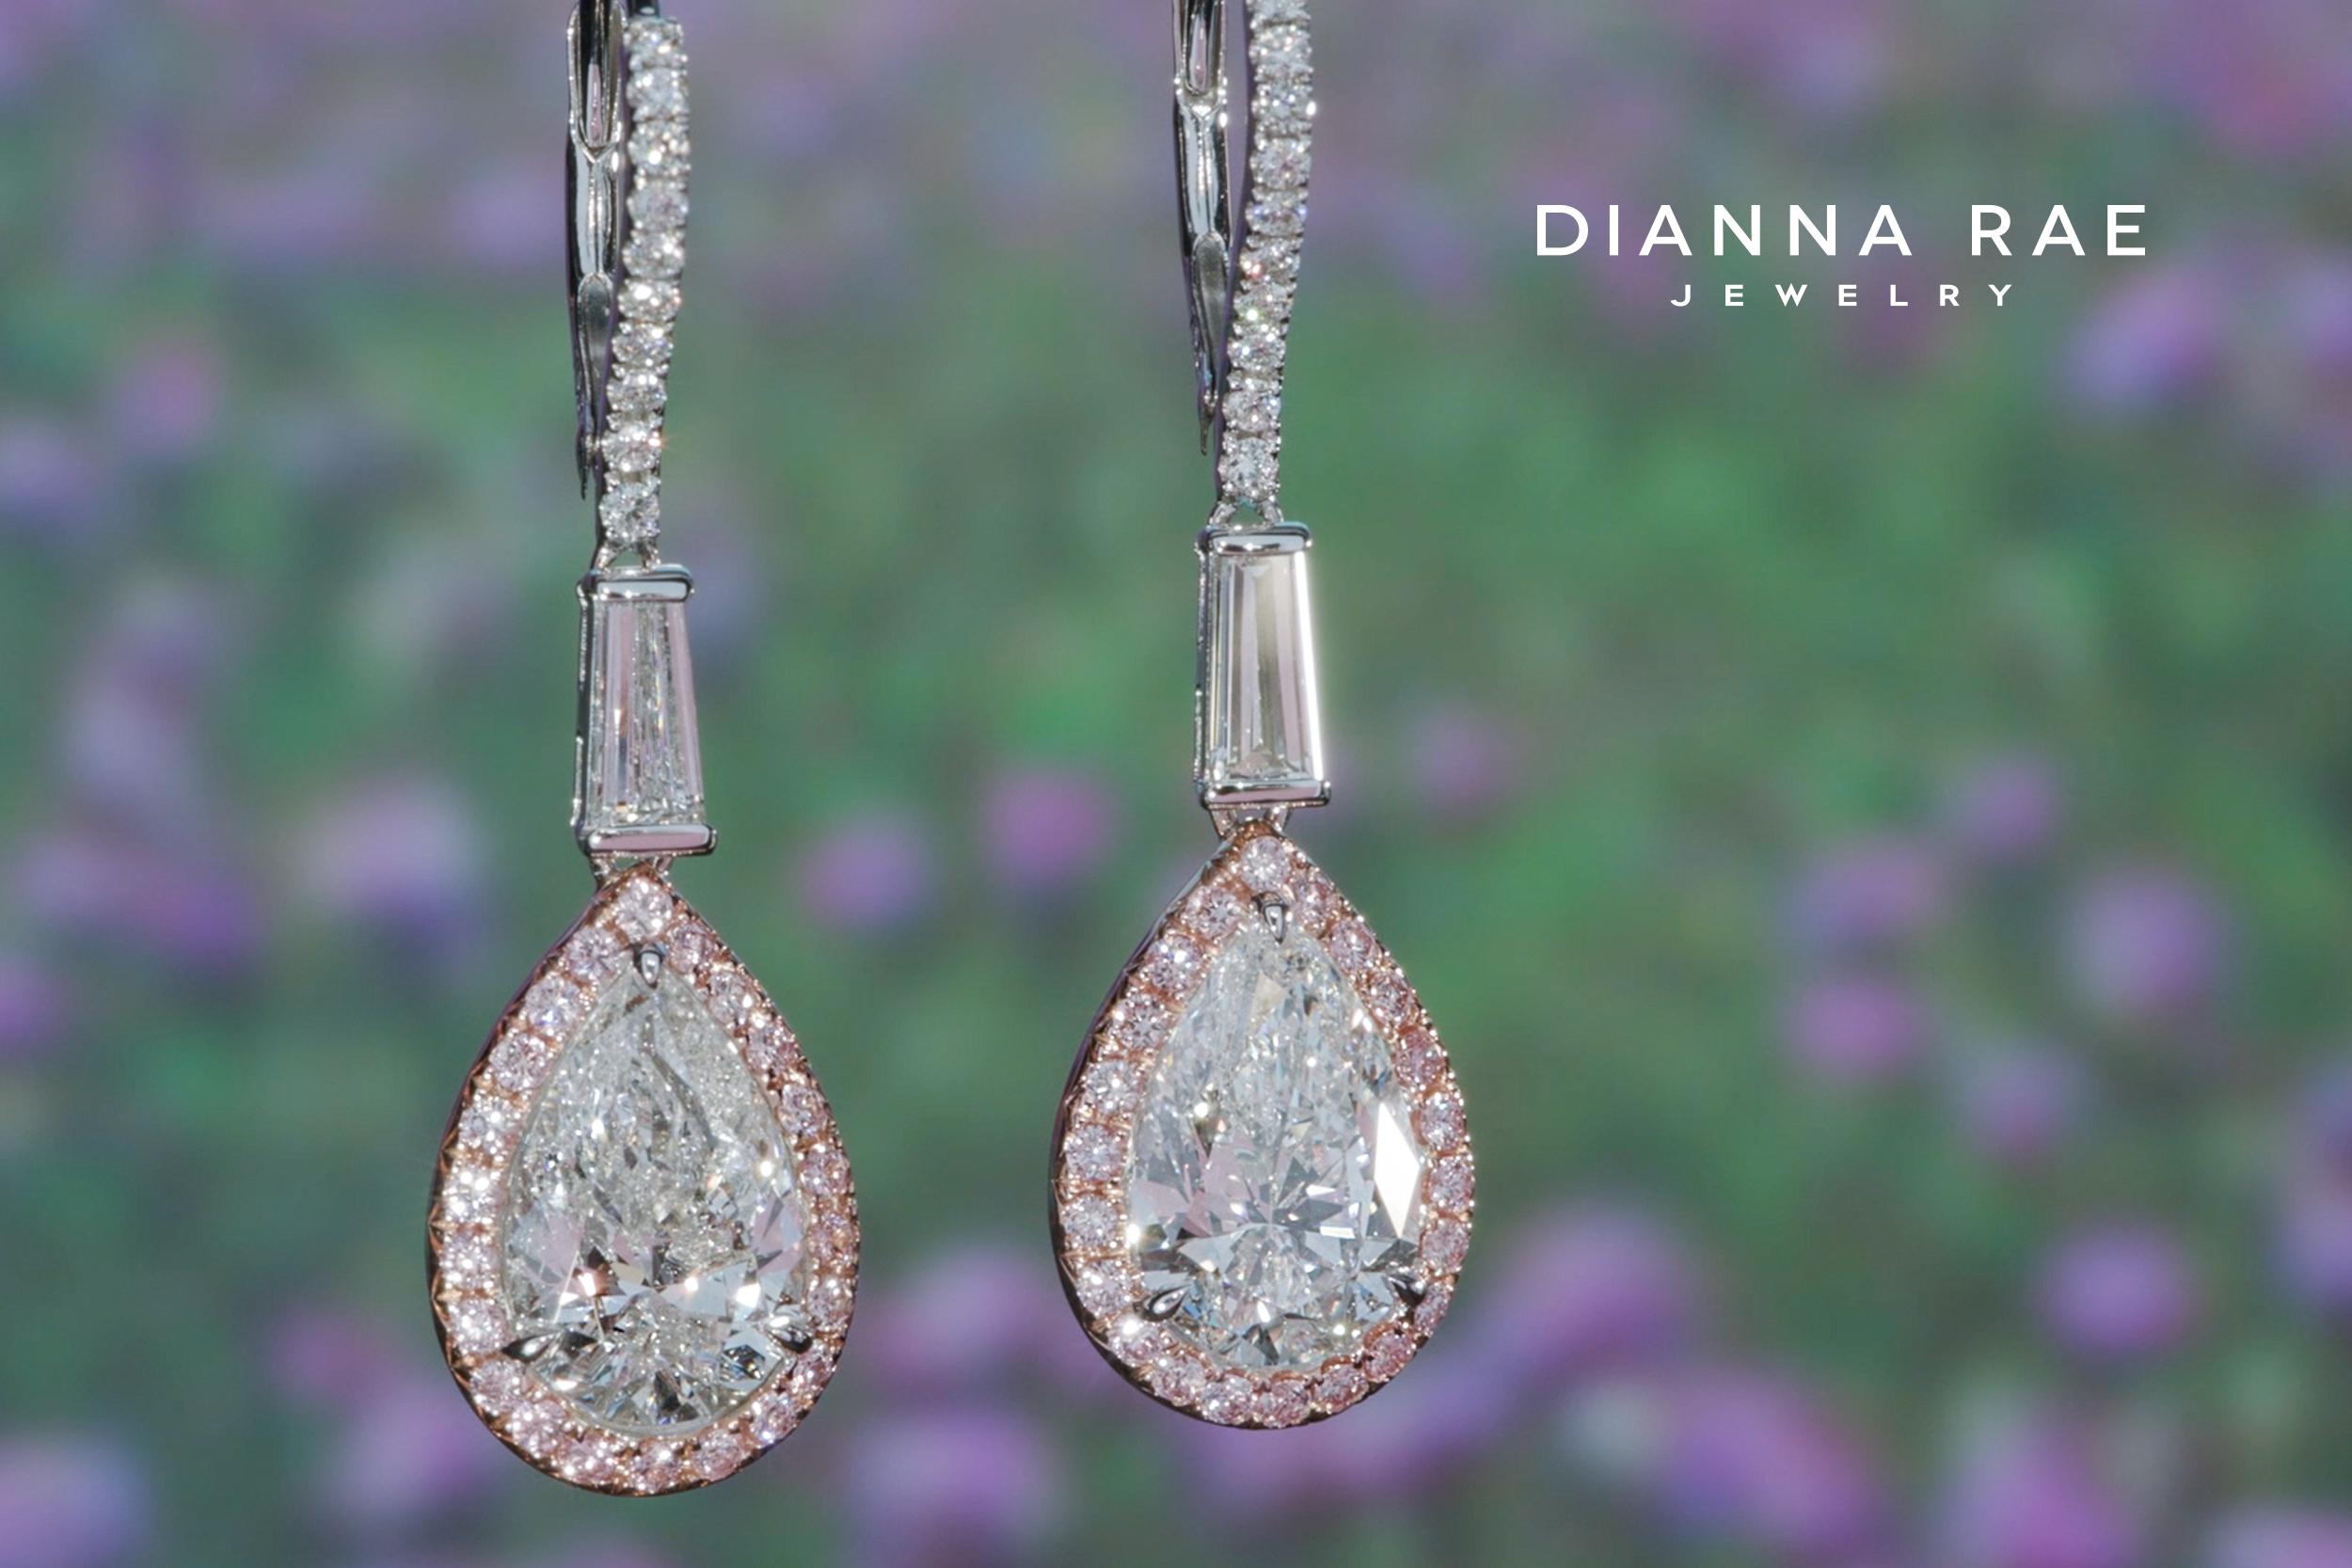 Set in 18k white and rose gold, these 5.16 carat total weight pear shape diamond dangle earrings are accented with 44 sparkling natural pink diamonds.

Pear shape Diamonds 4.04 cts TW D SI2
Taper baguette Diamonds 0.55 cts TW
0.41 cts TW round